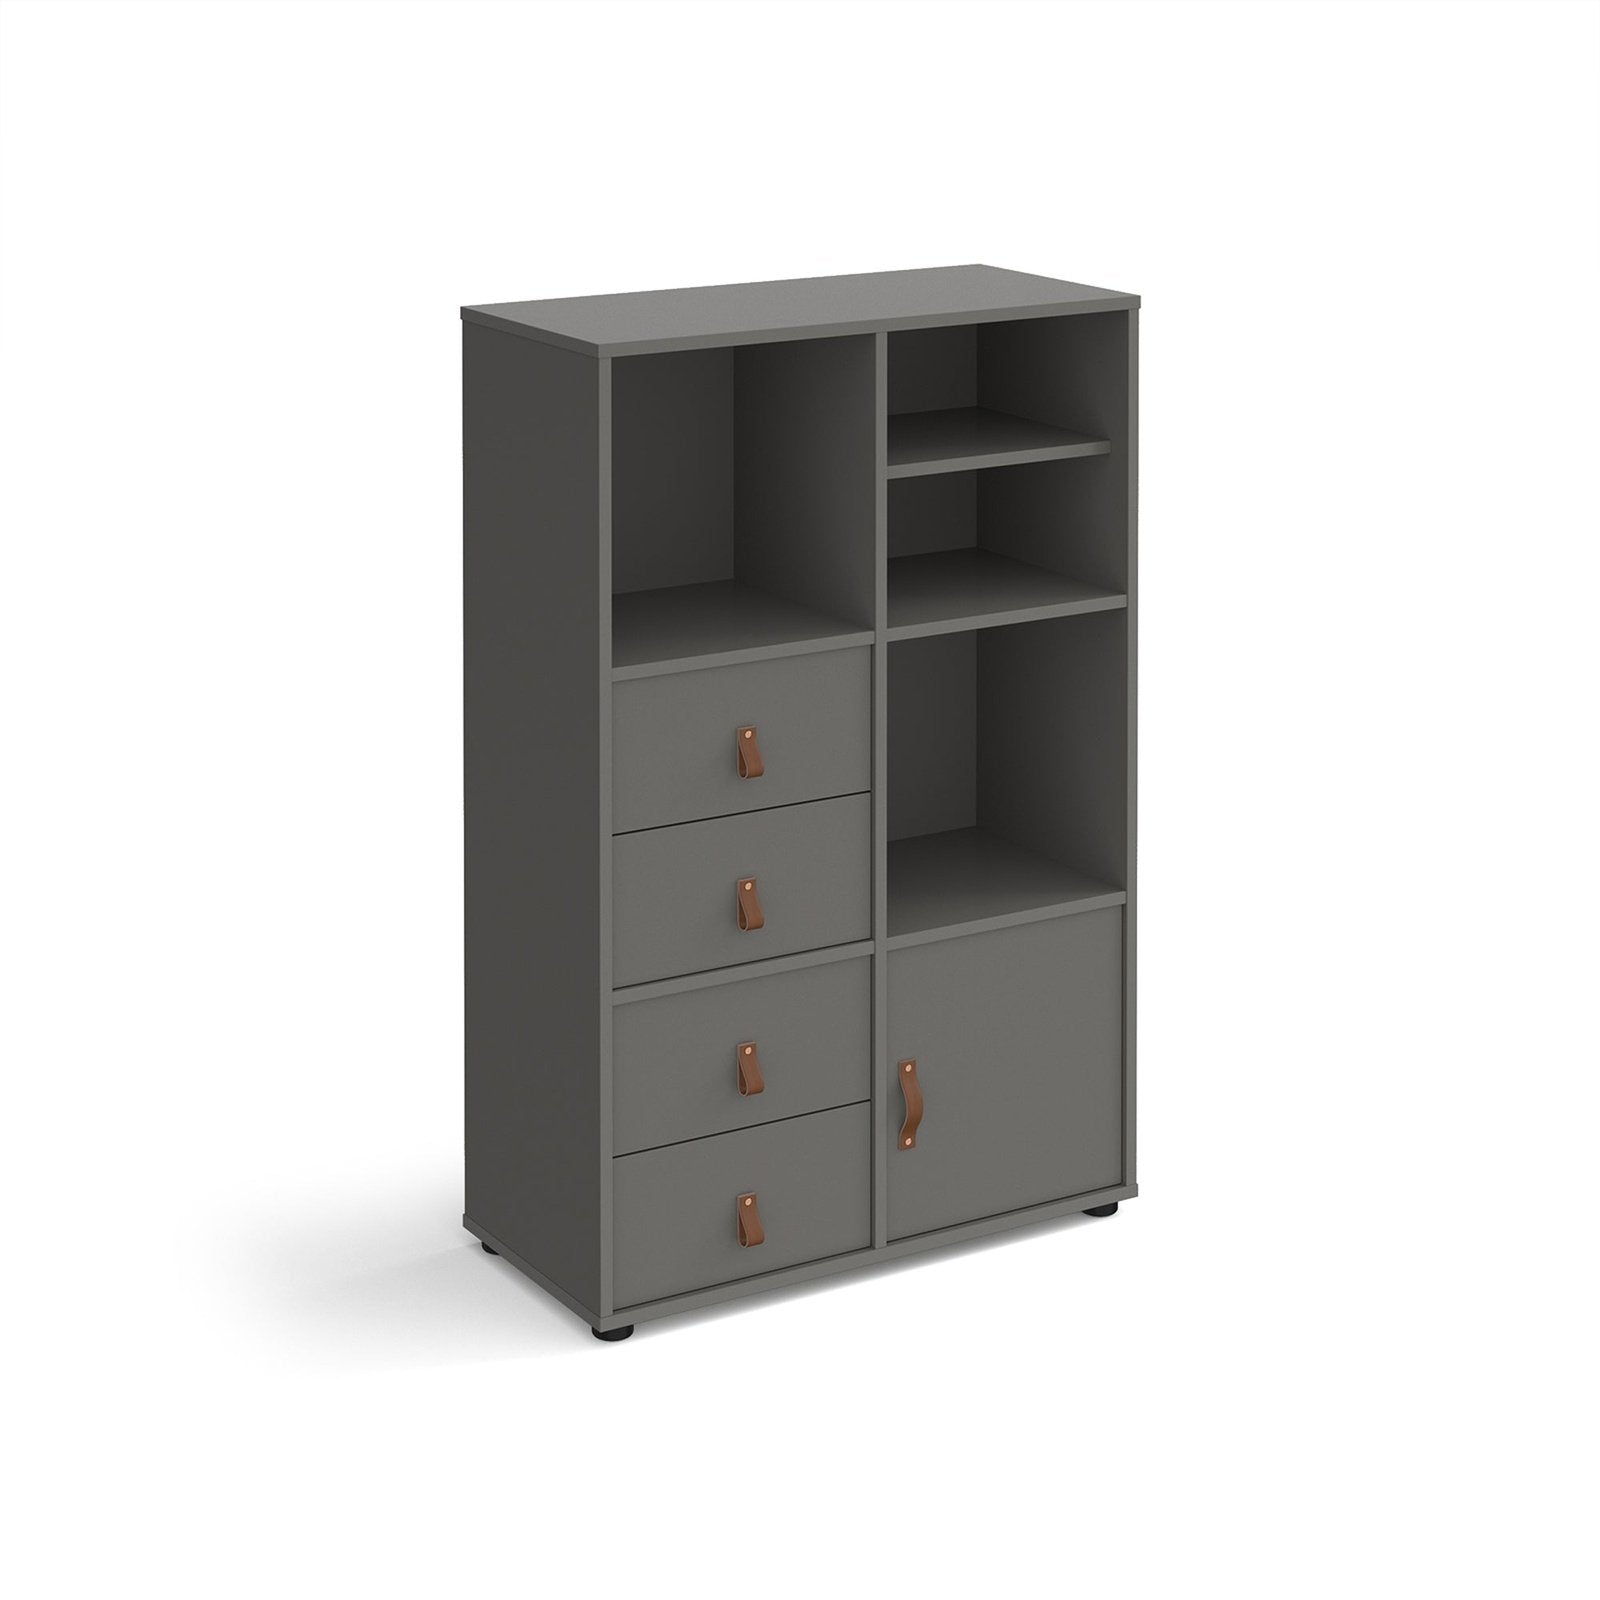 Universal cube storage unit 1295mm high on glides with matching shelf, cupboard and 2 sets of drawers - Office Products Online